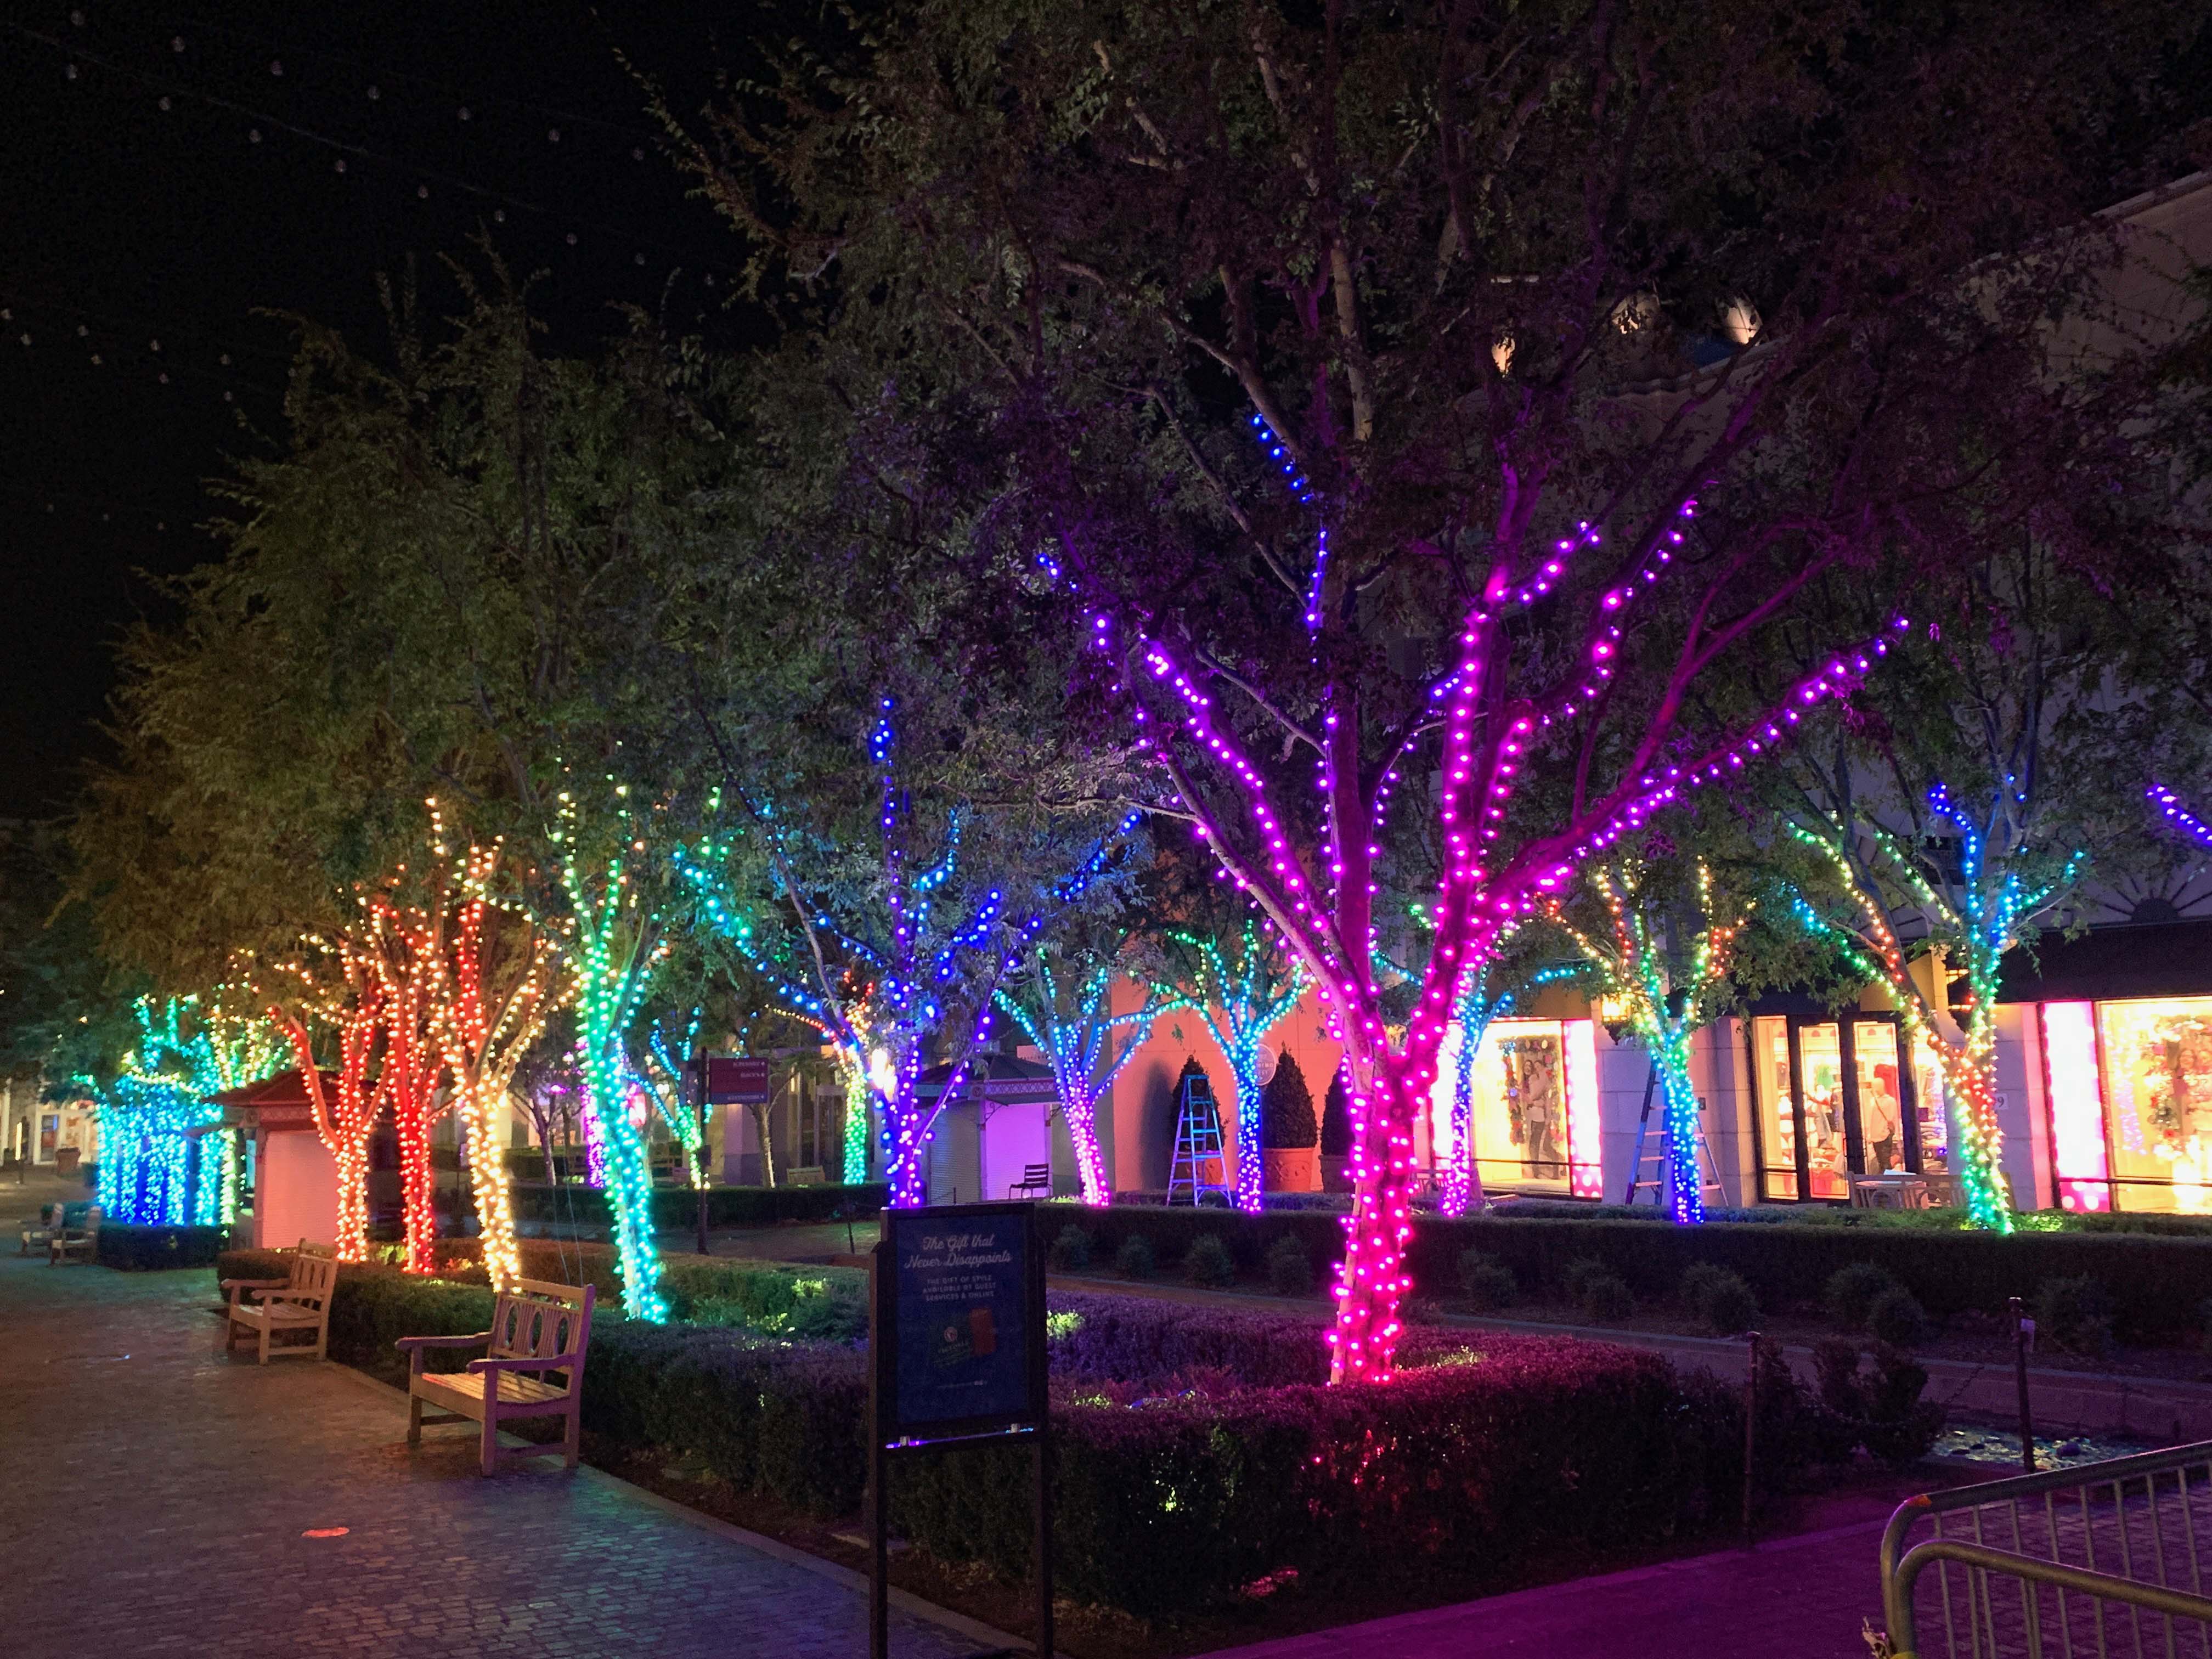 Magical Christmas walking tour of Victoria Gardens in Rancho